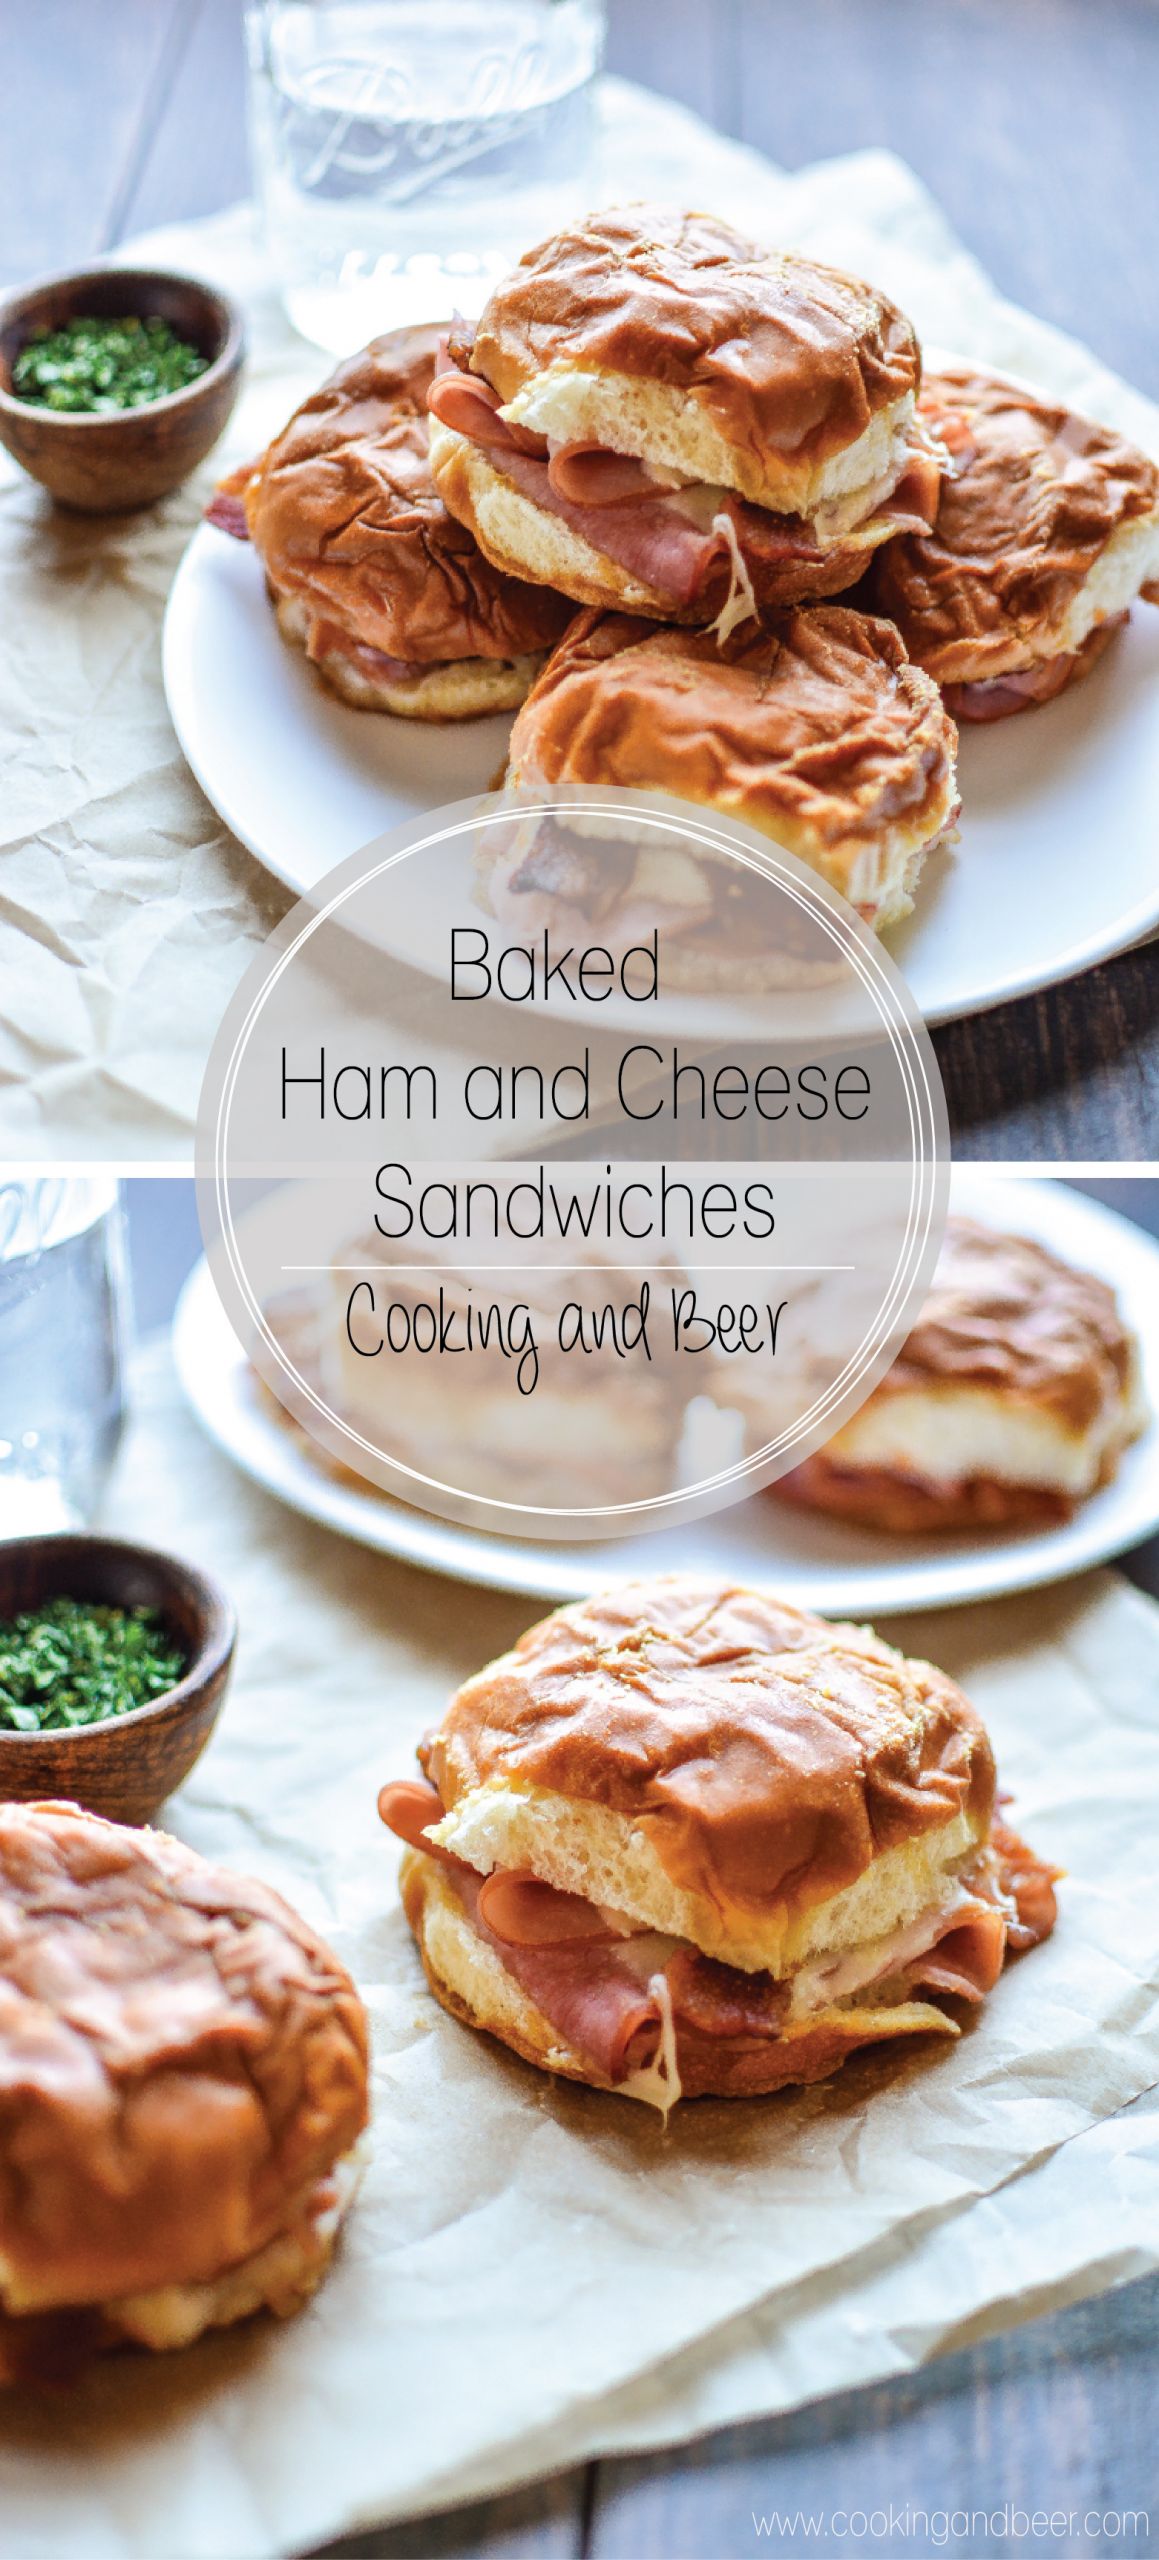 Baked Ham And Cheese Sandwiches In Foil
 Baked Ham and Cheese Sandwiches with Spicy Mustard